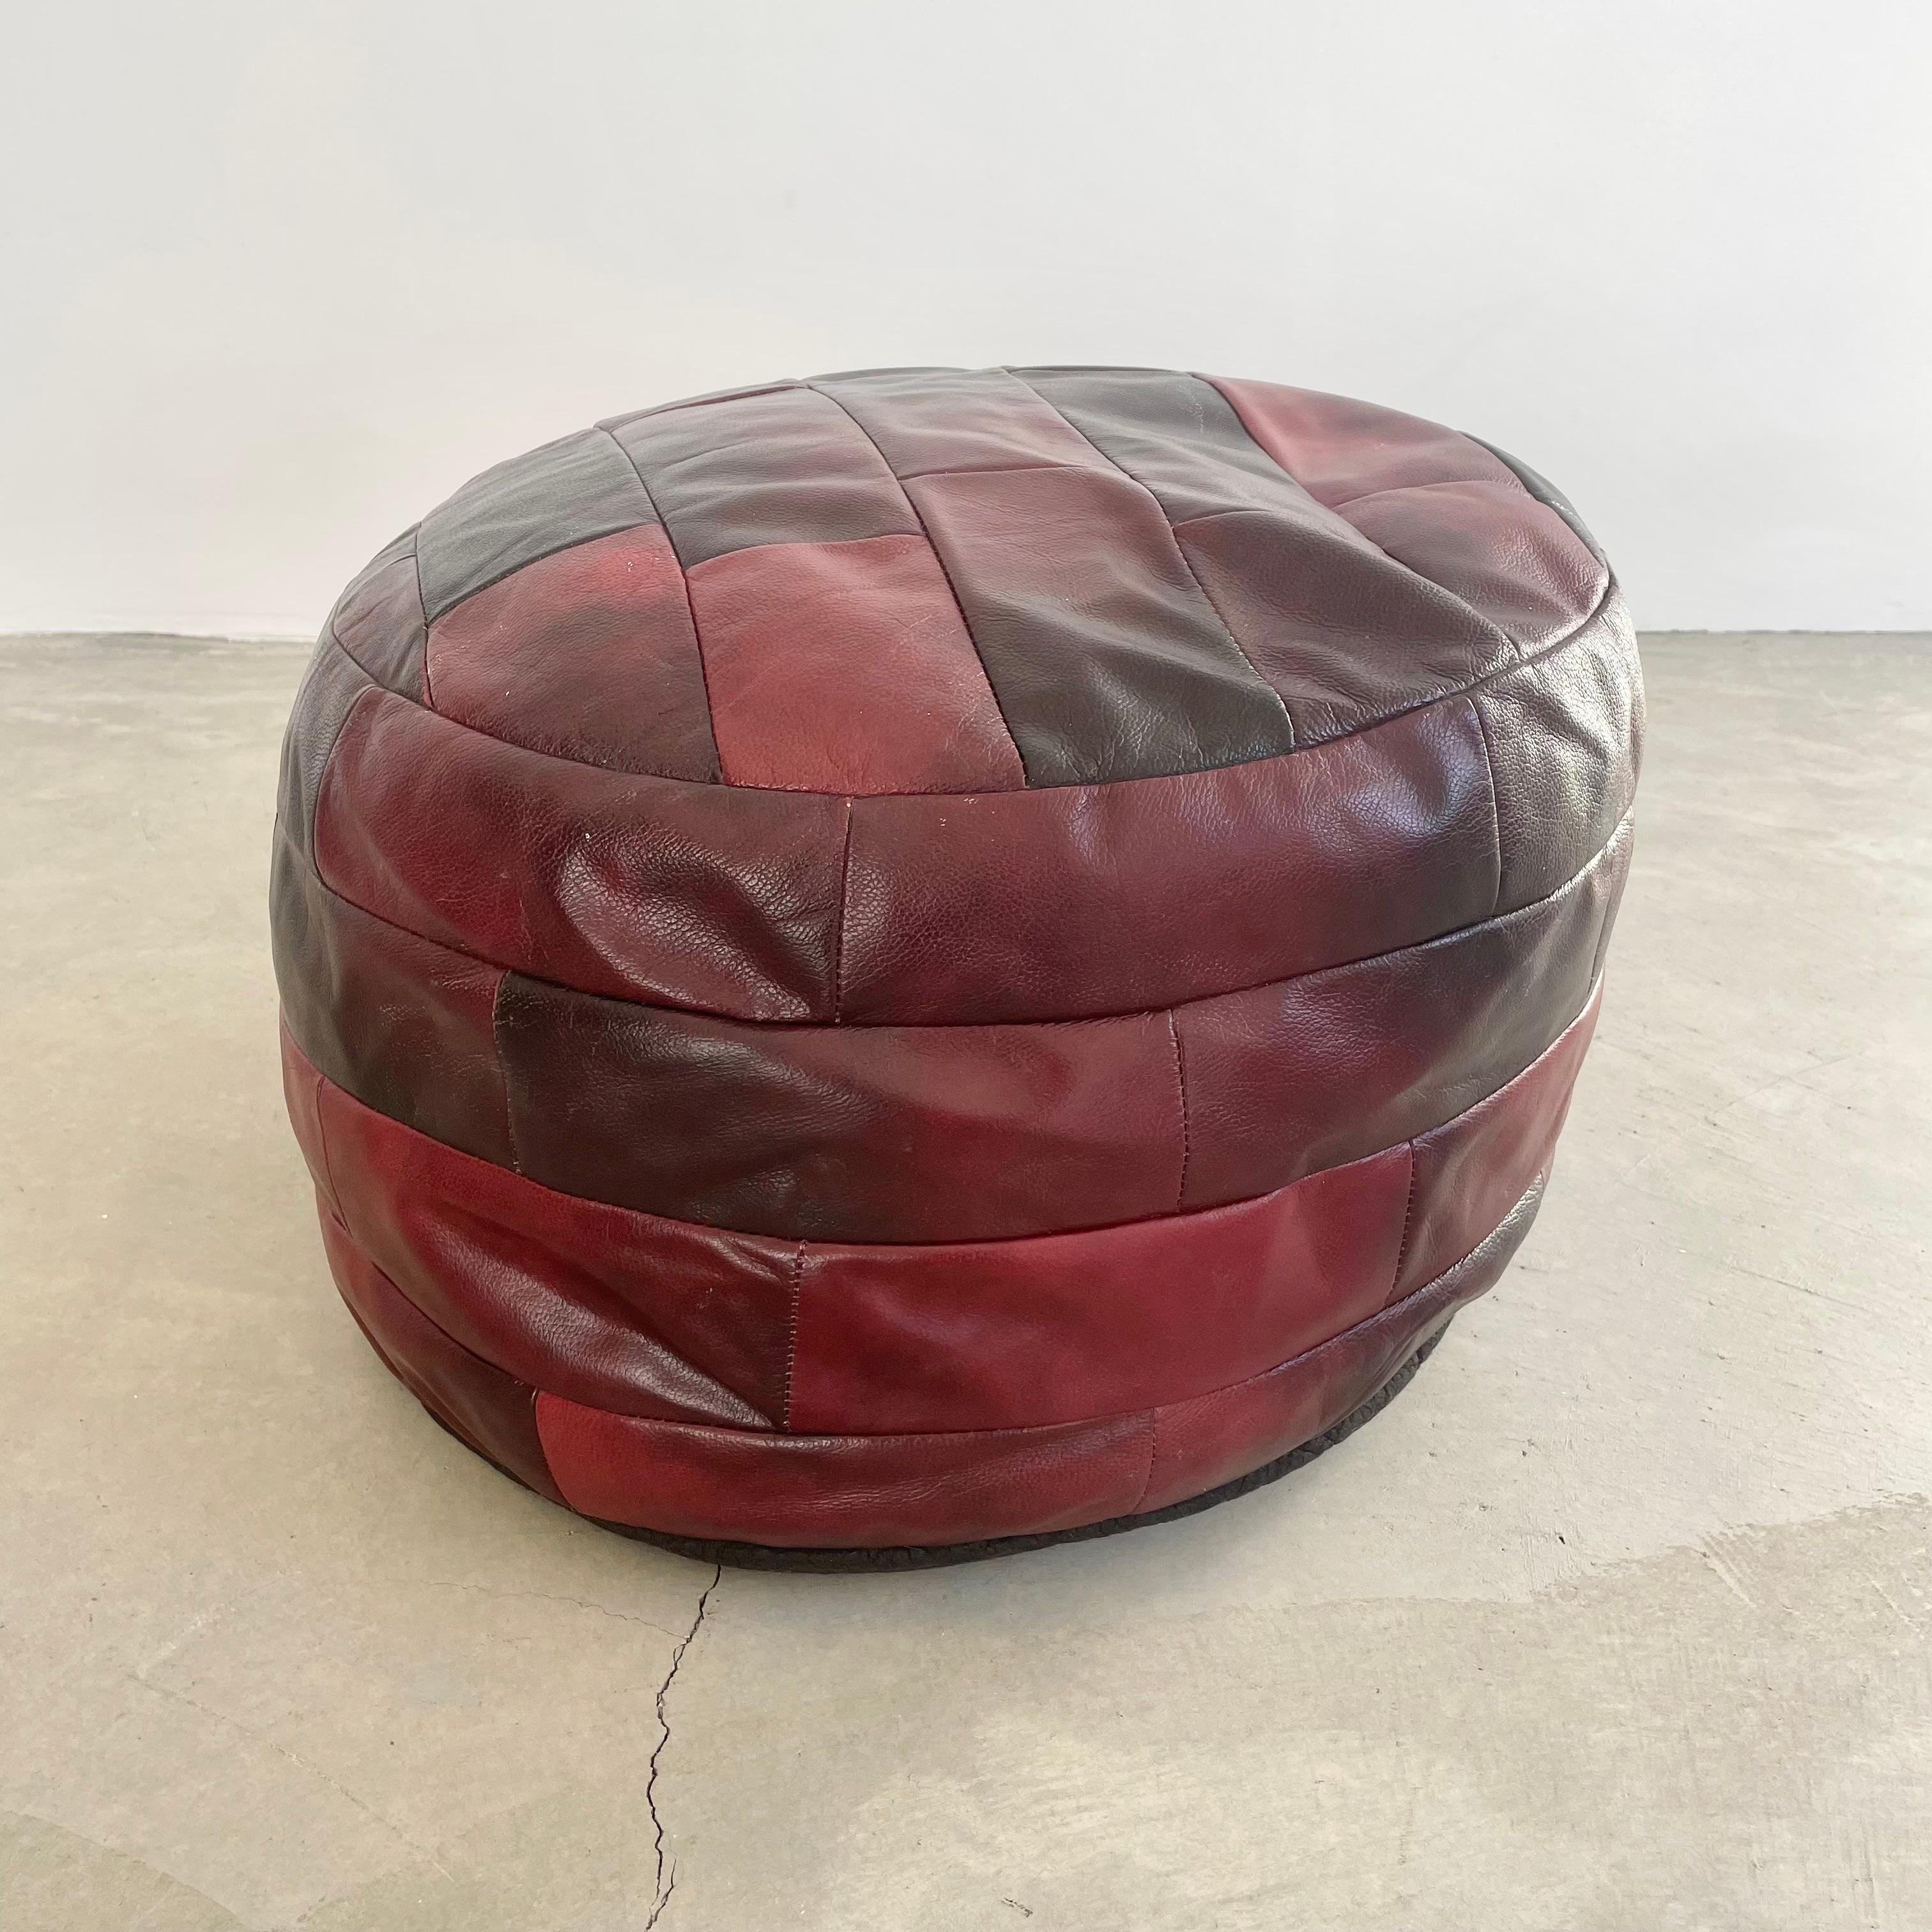 Chic red leather pouf/ottoman by Swiss designer De Sede with square patchwork. Handmade with wonderful faded patina or varying hues of reds. Gorgeous accent piece. Good vintage condition. Wear appropriate with age. Brand new filler. Perfect living